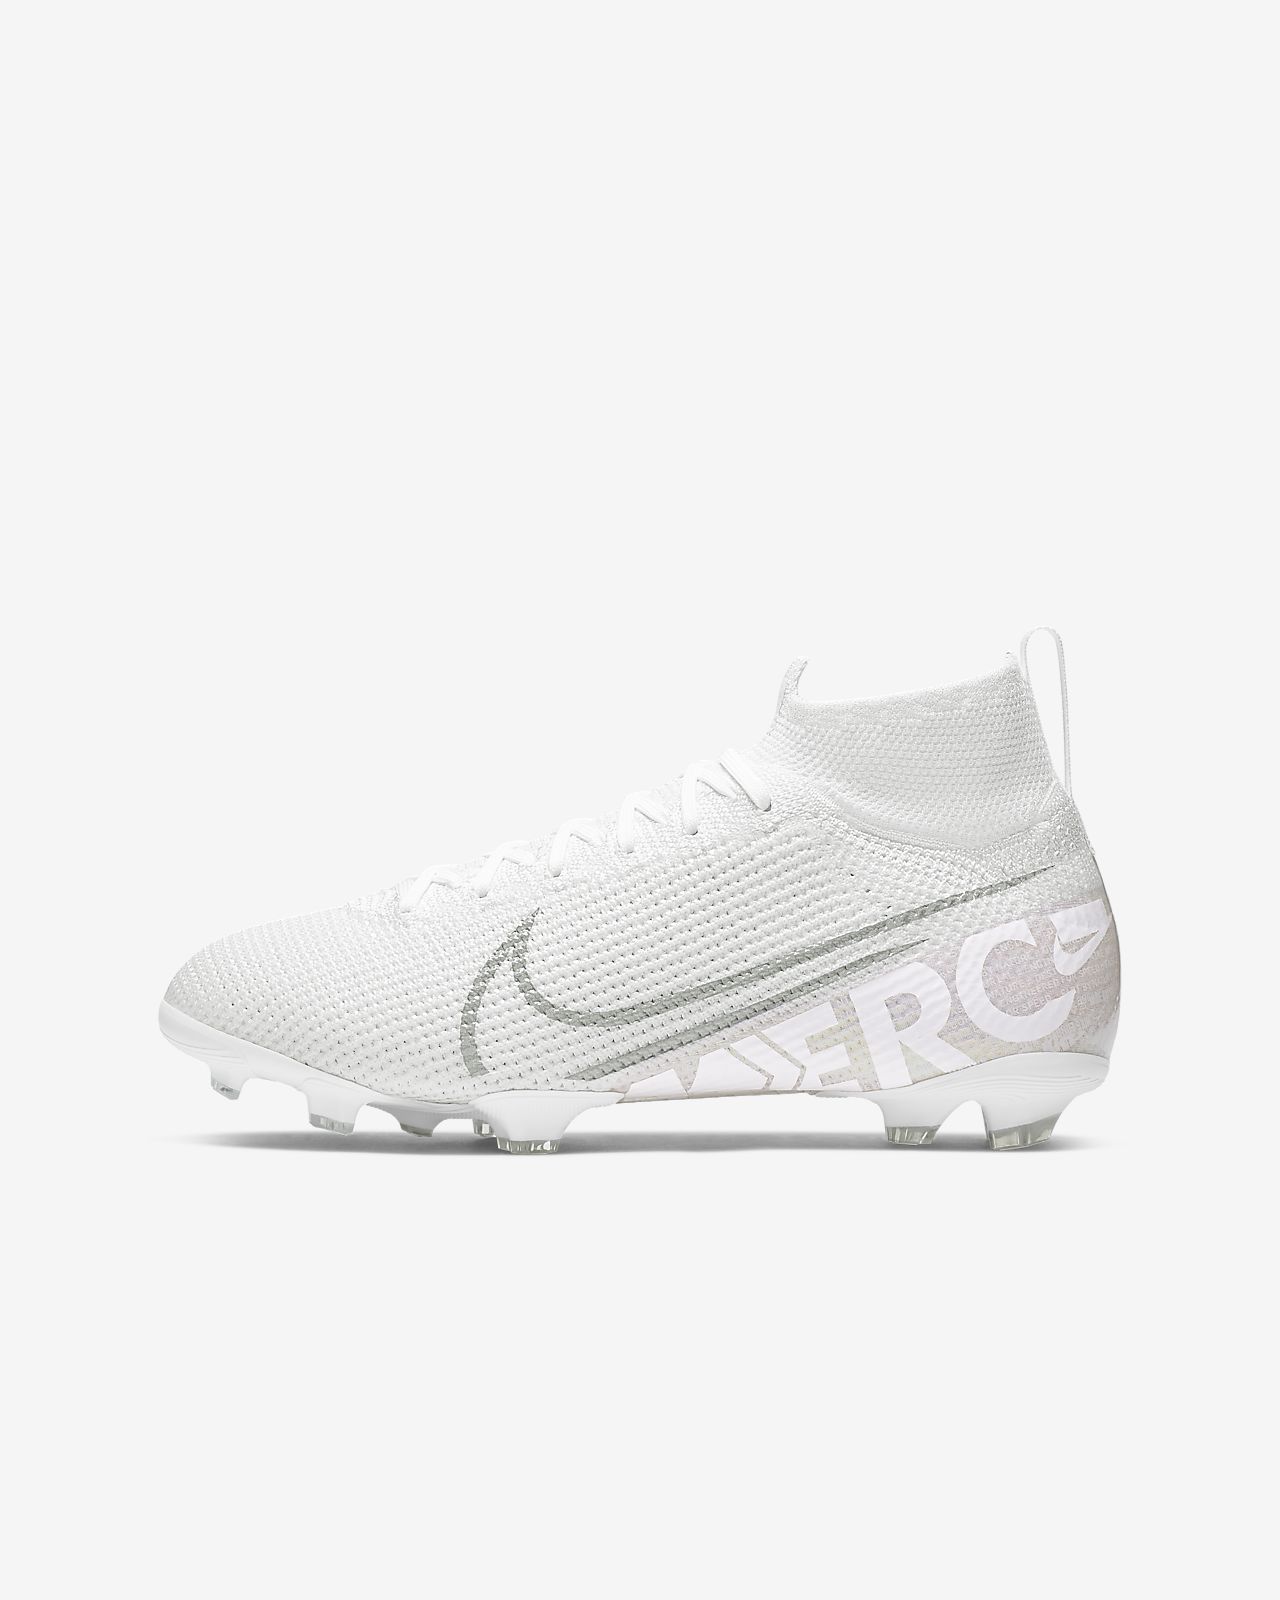 Nike Mercurial Superfly V AG Pro Soccer Cleats 831955 616